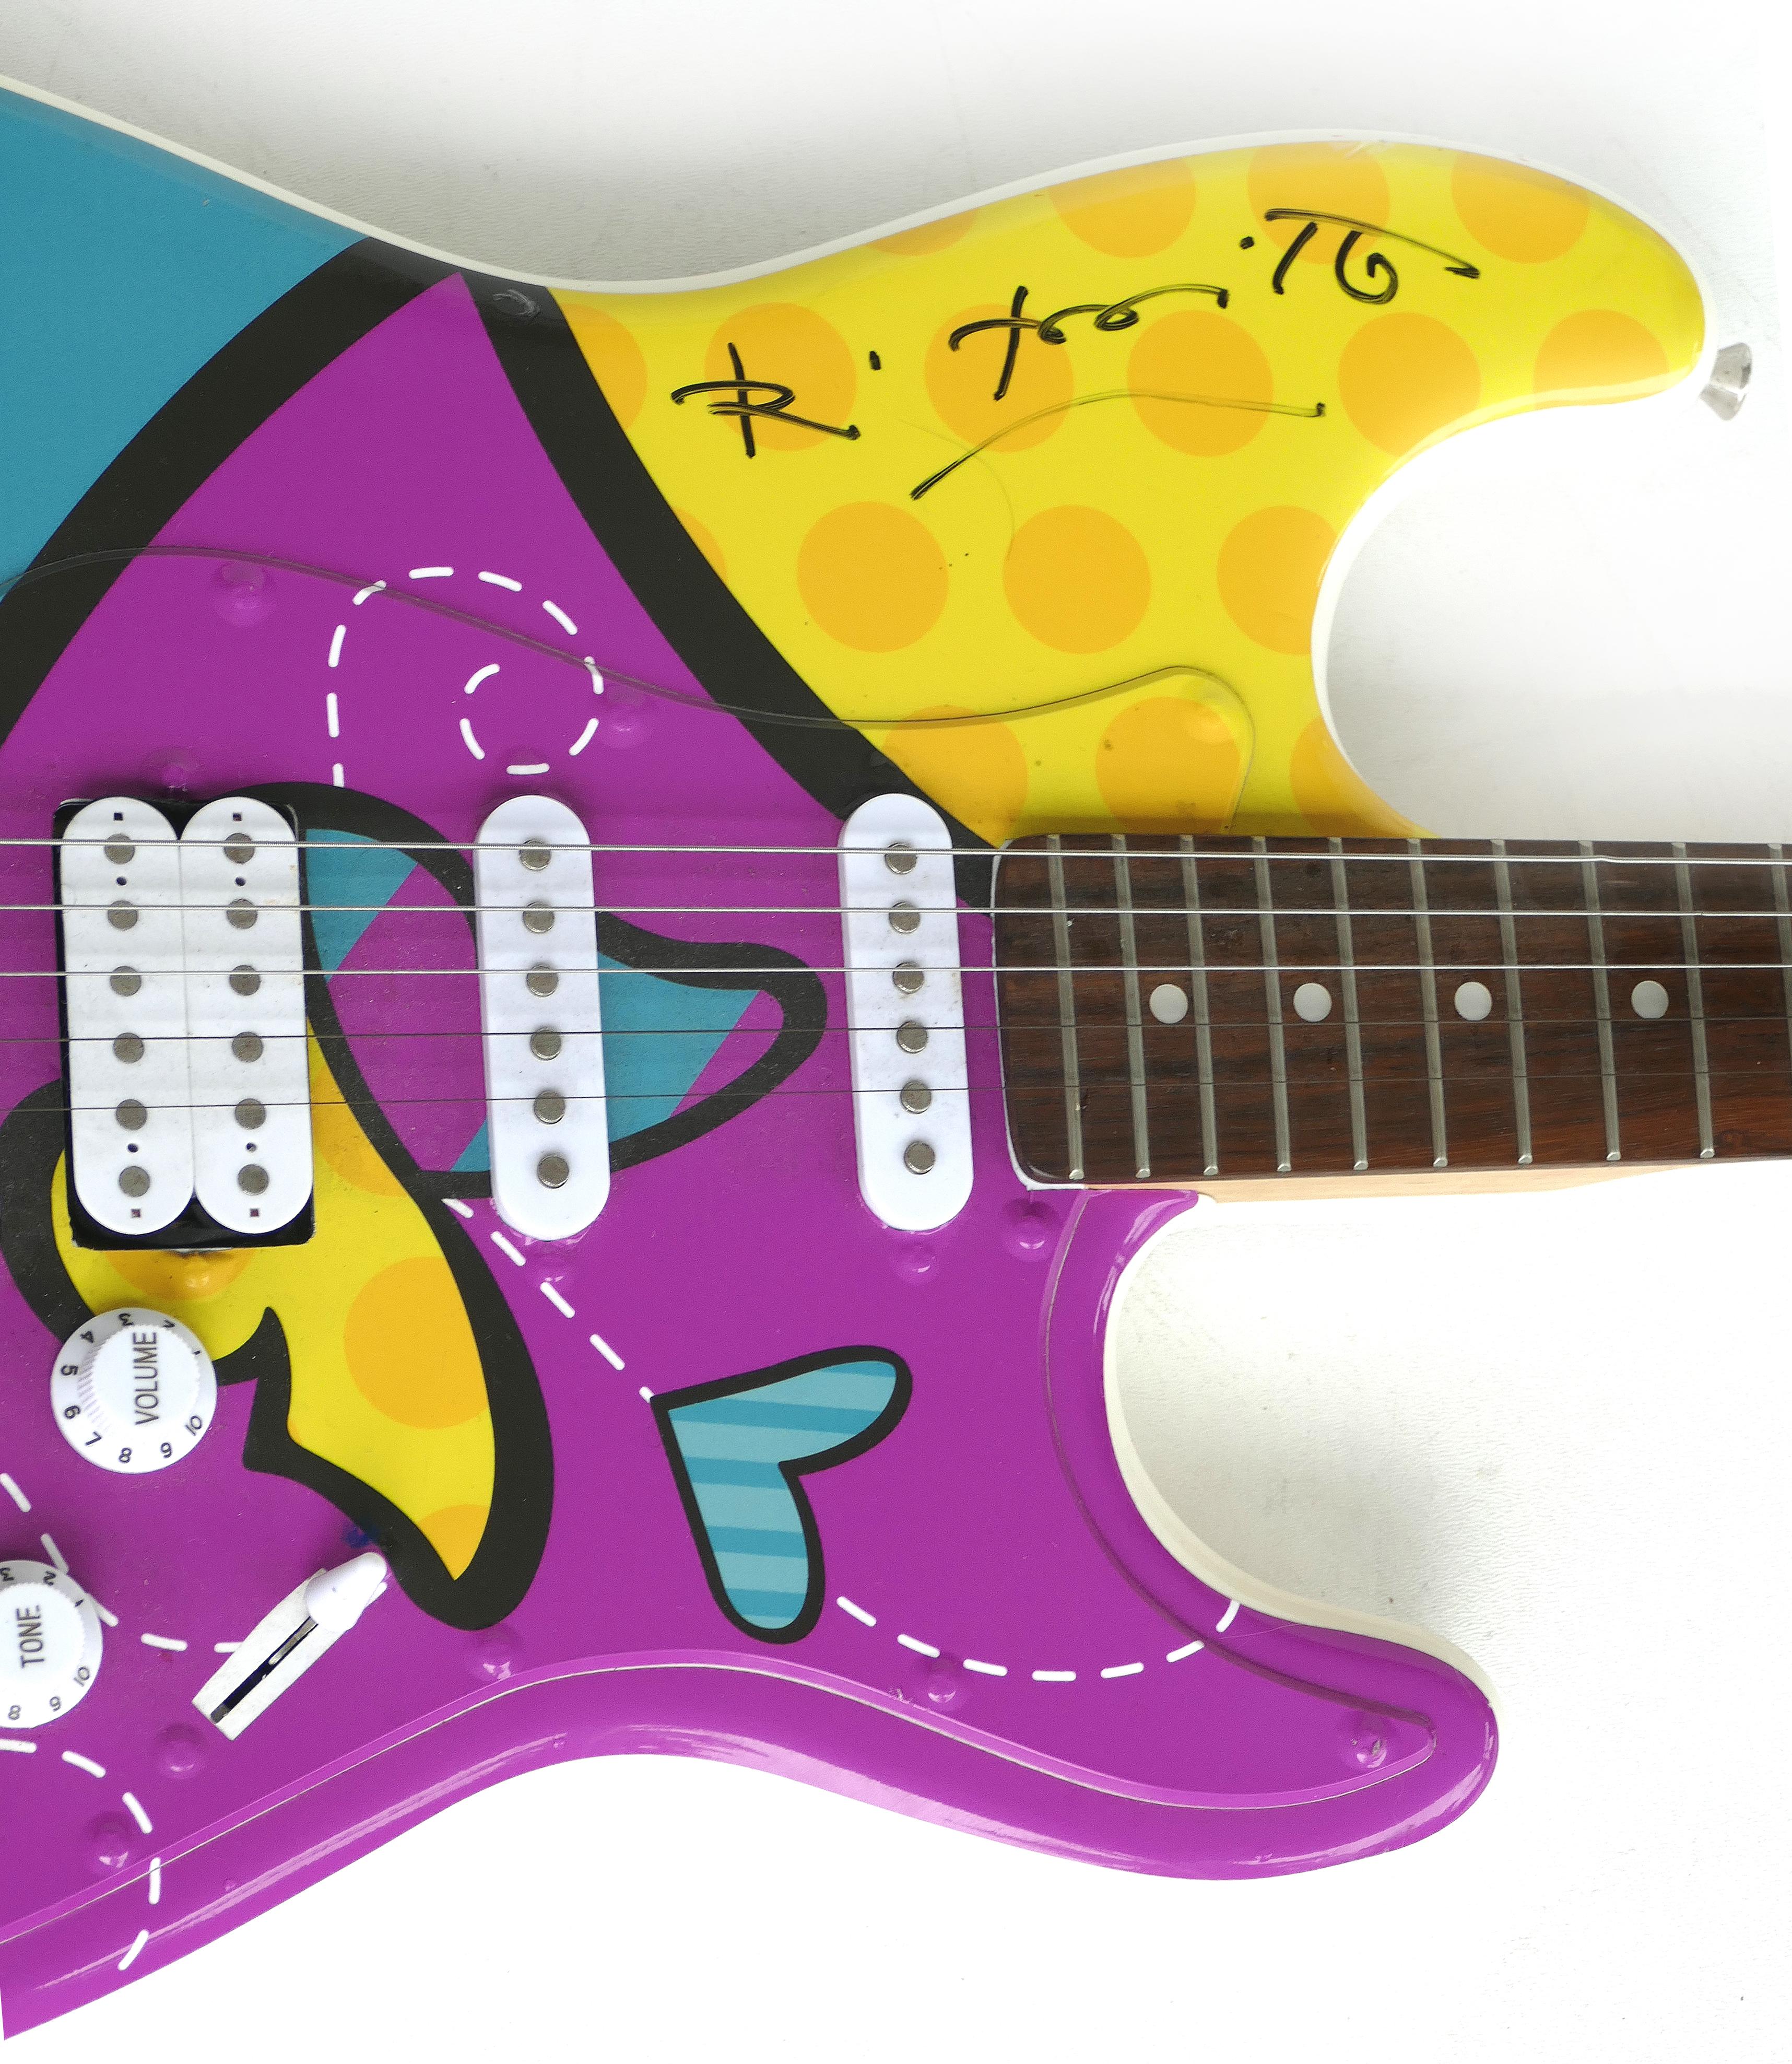 Glen Burton Romero Britto guitar for Lauren's Kids Charity

Offered for sale is a Glen Burton electric guitar that has been hand-painted by the Brazilian artist, Romero Britto, for the charity Lauren's Kids (Preventing Child Abuse, Healing